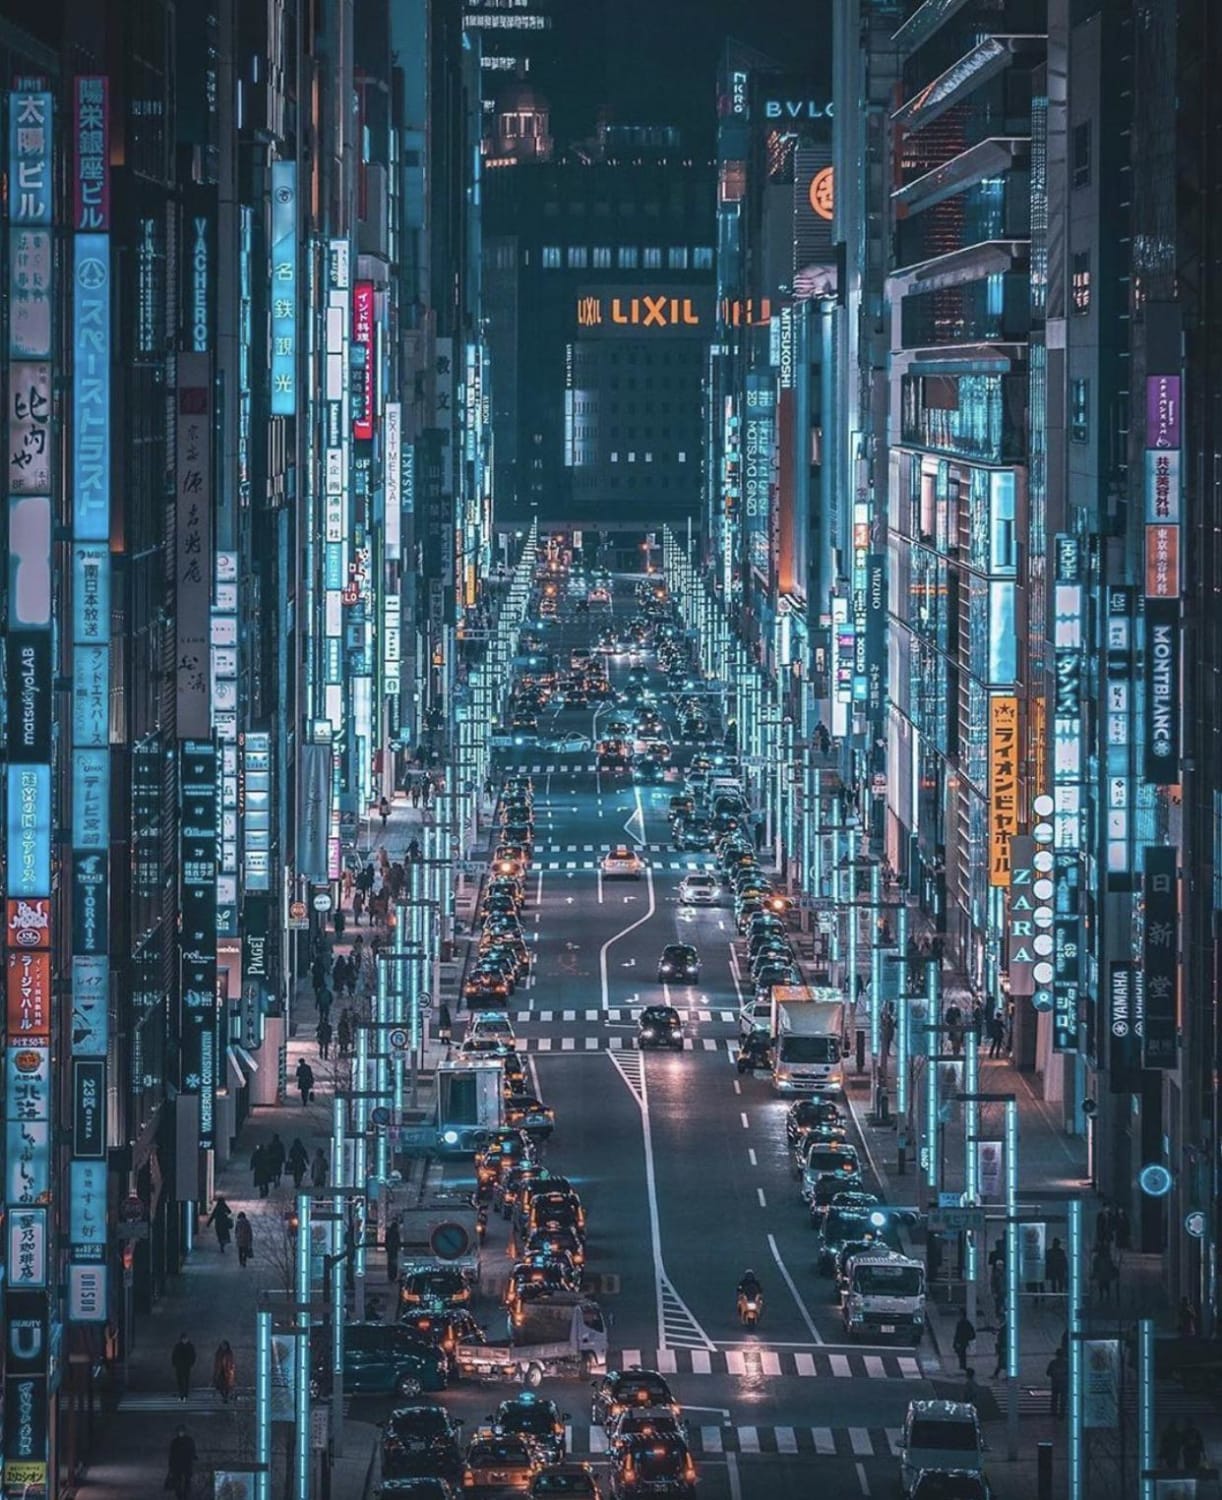 Tokyo, the city of lights